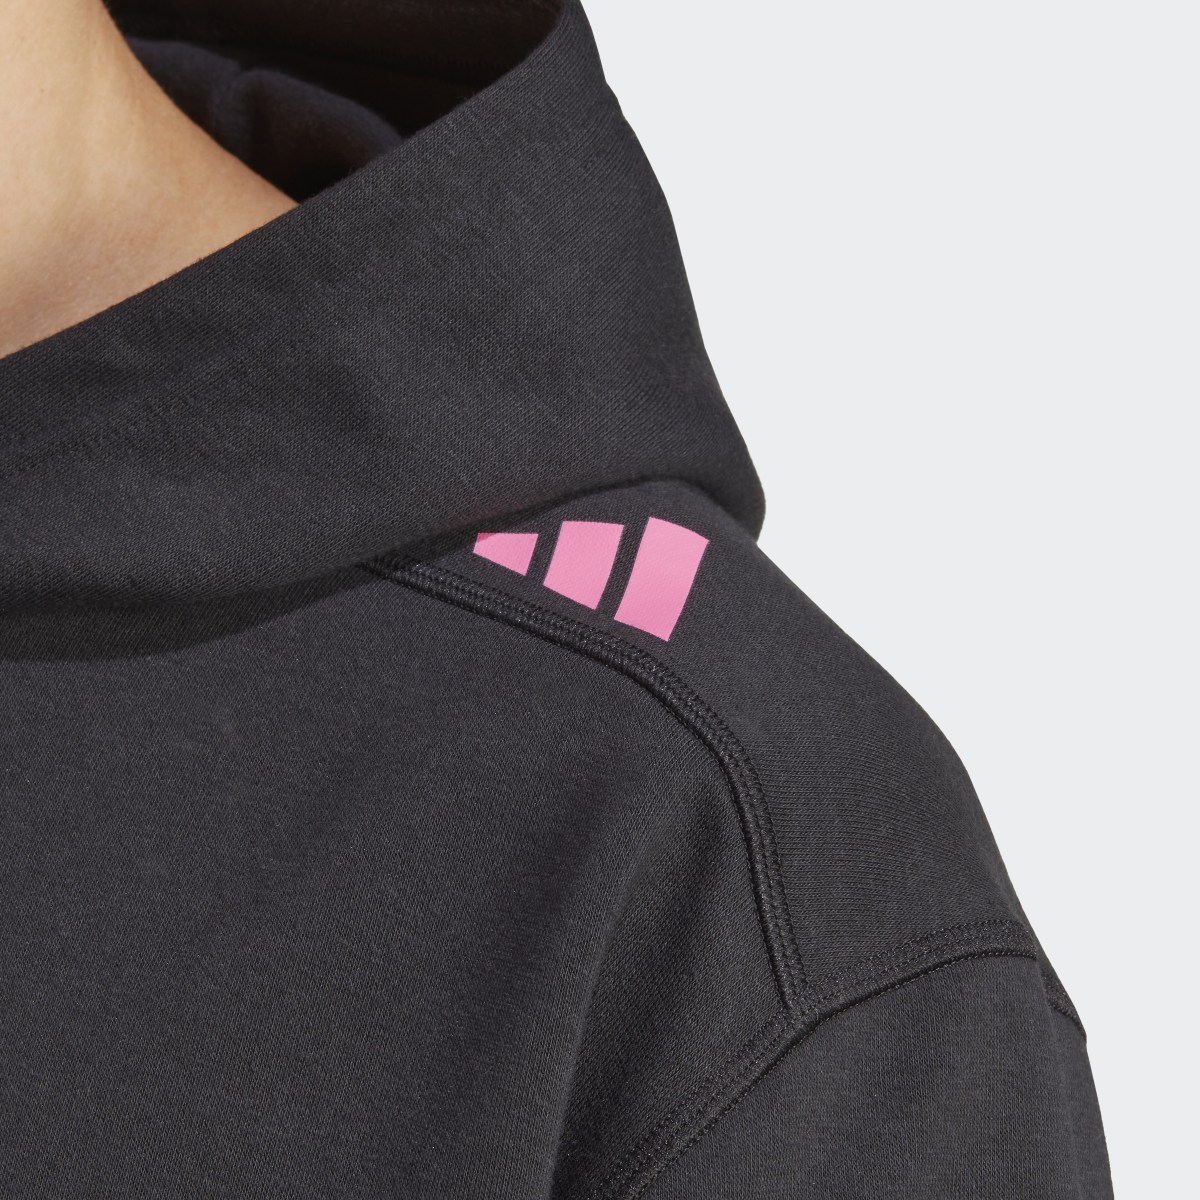 Adidas Curated by Cody Rigsby HIIT Hoodie. 6